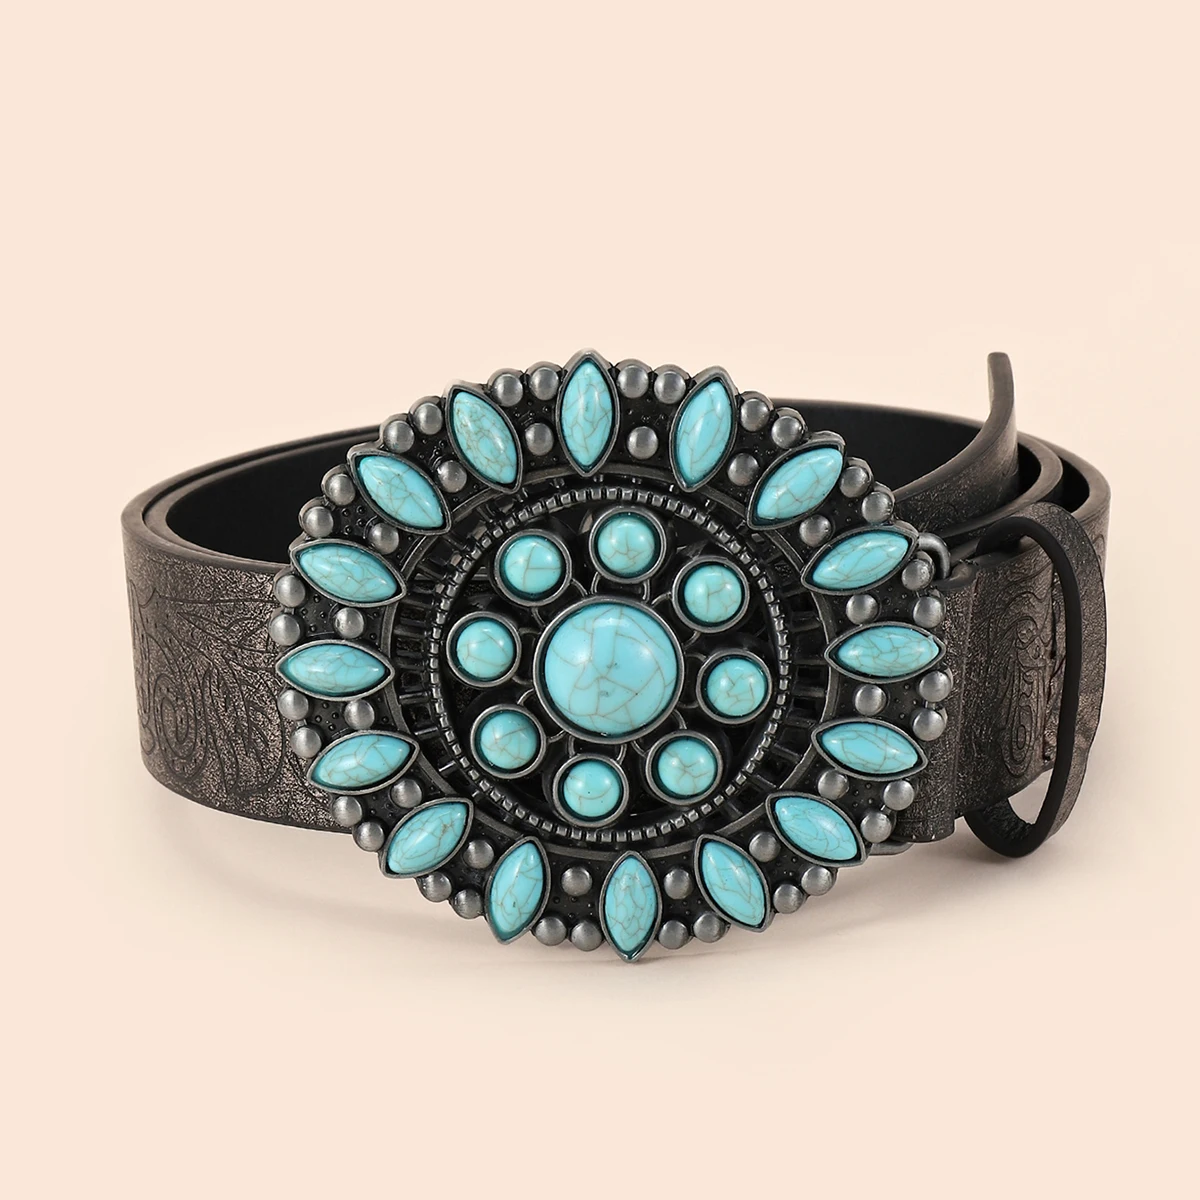 Fashion Geometric Buckle with Turquoises Western Cowboy Belts for Men